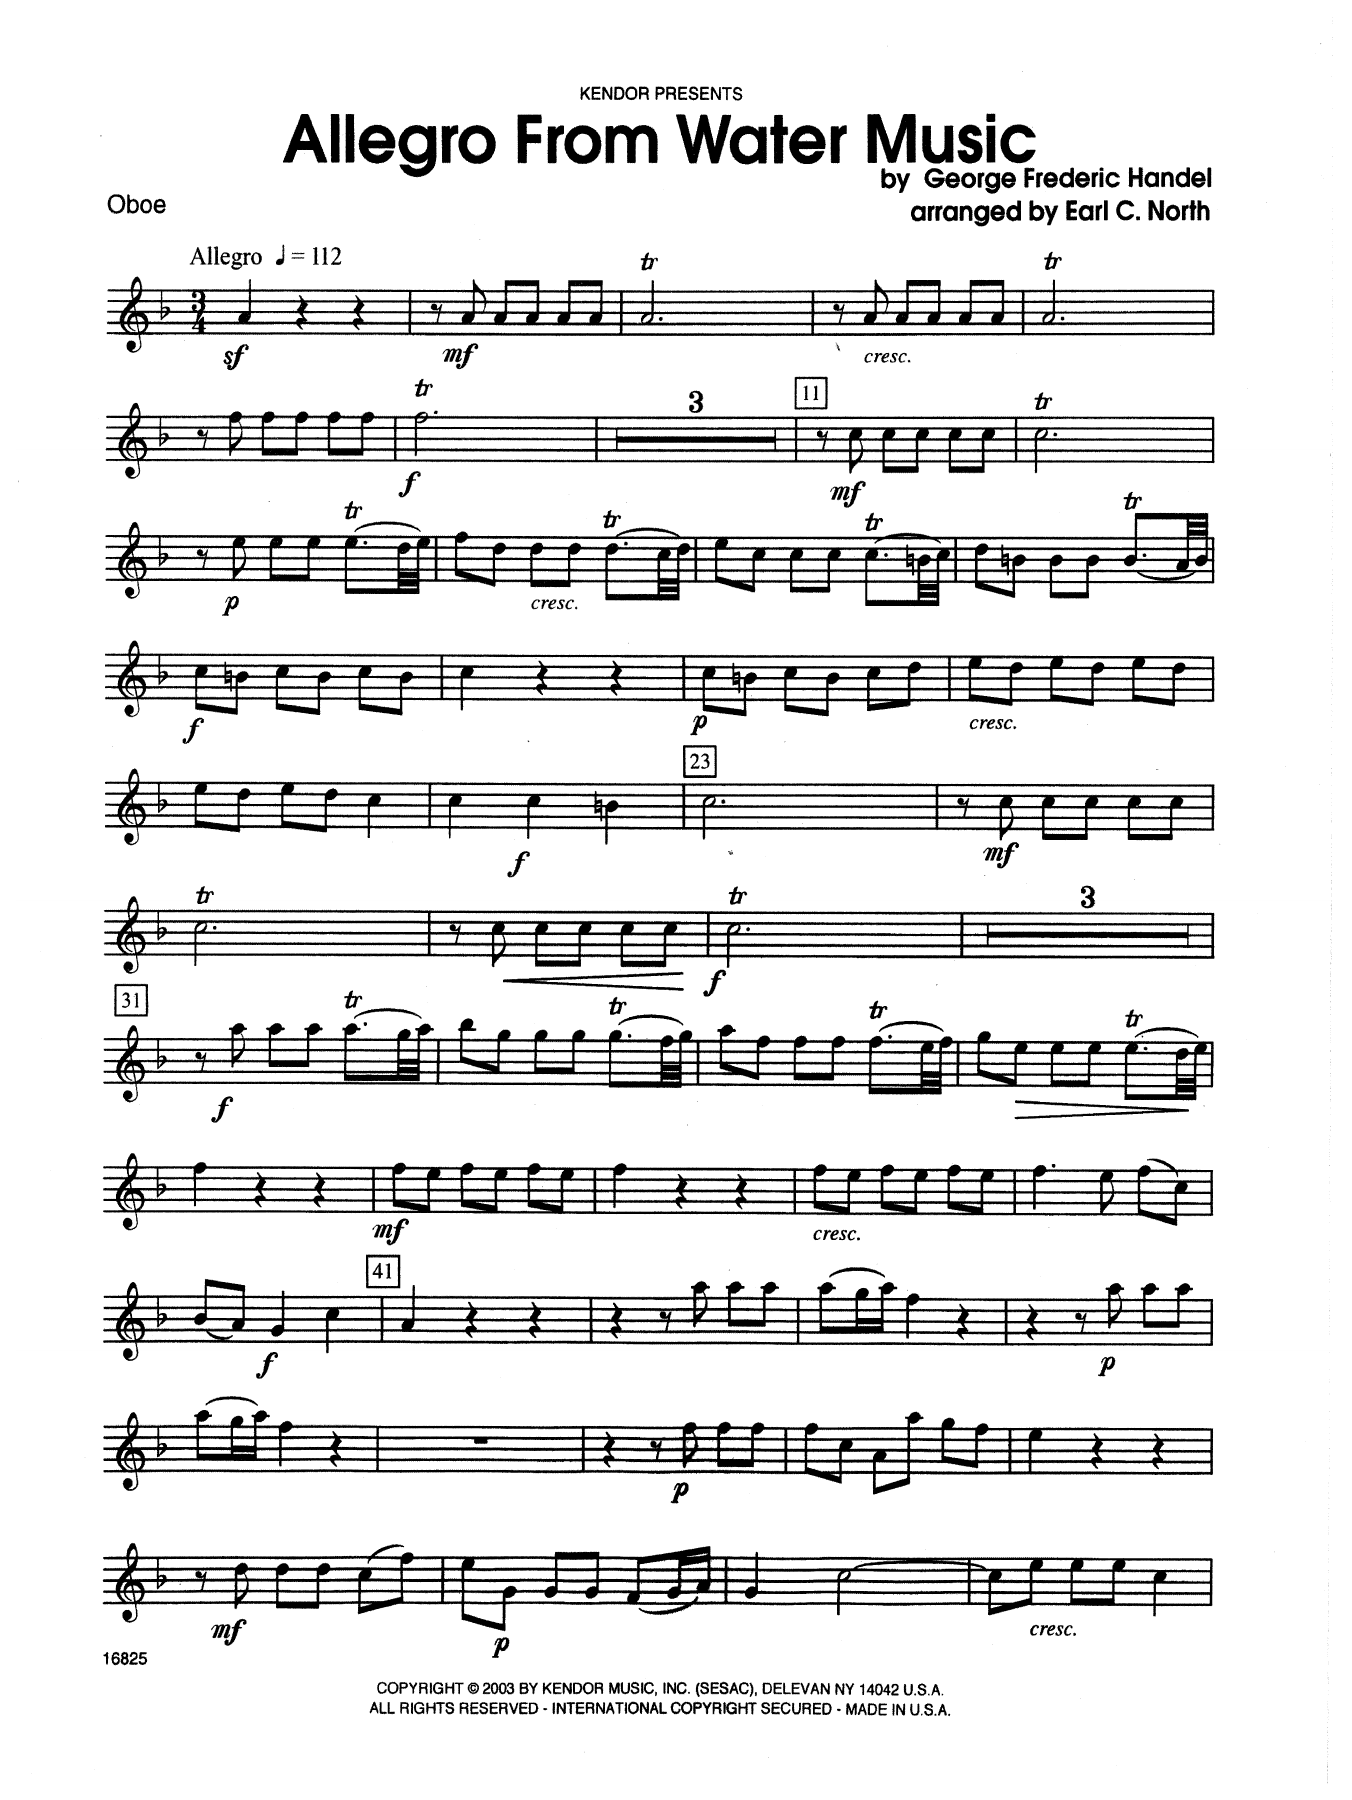 Download Earl North Allegro From Water Music - Oboe Sheet Music